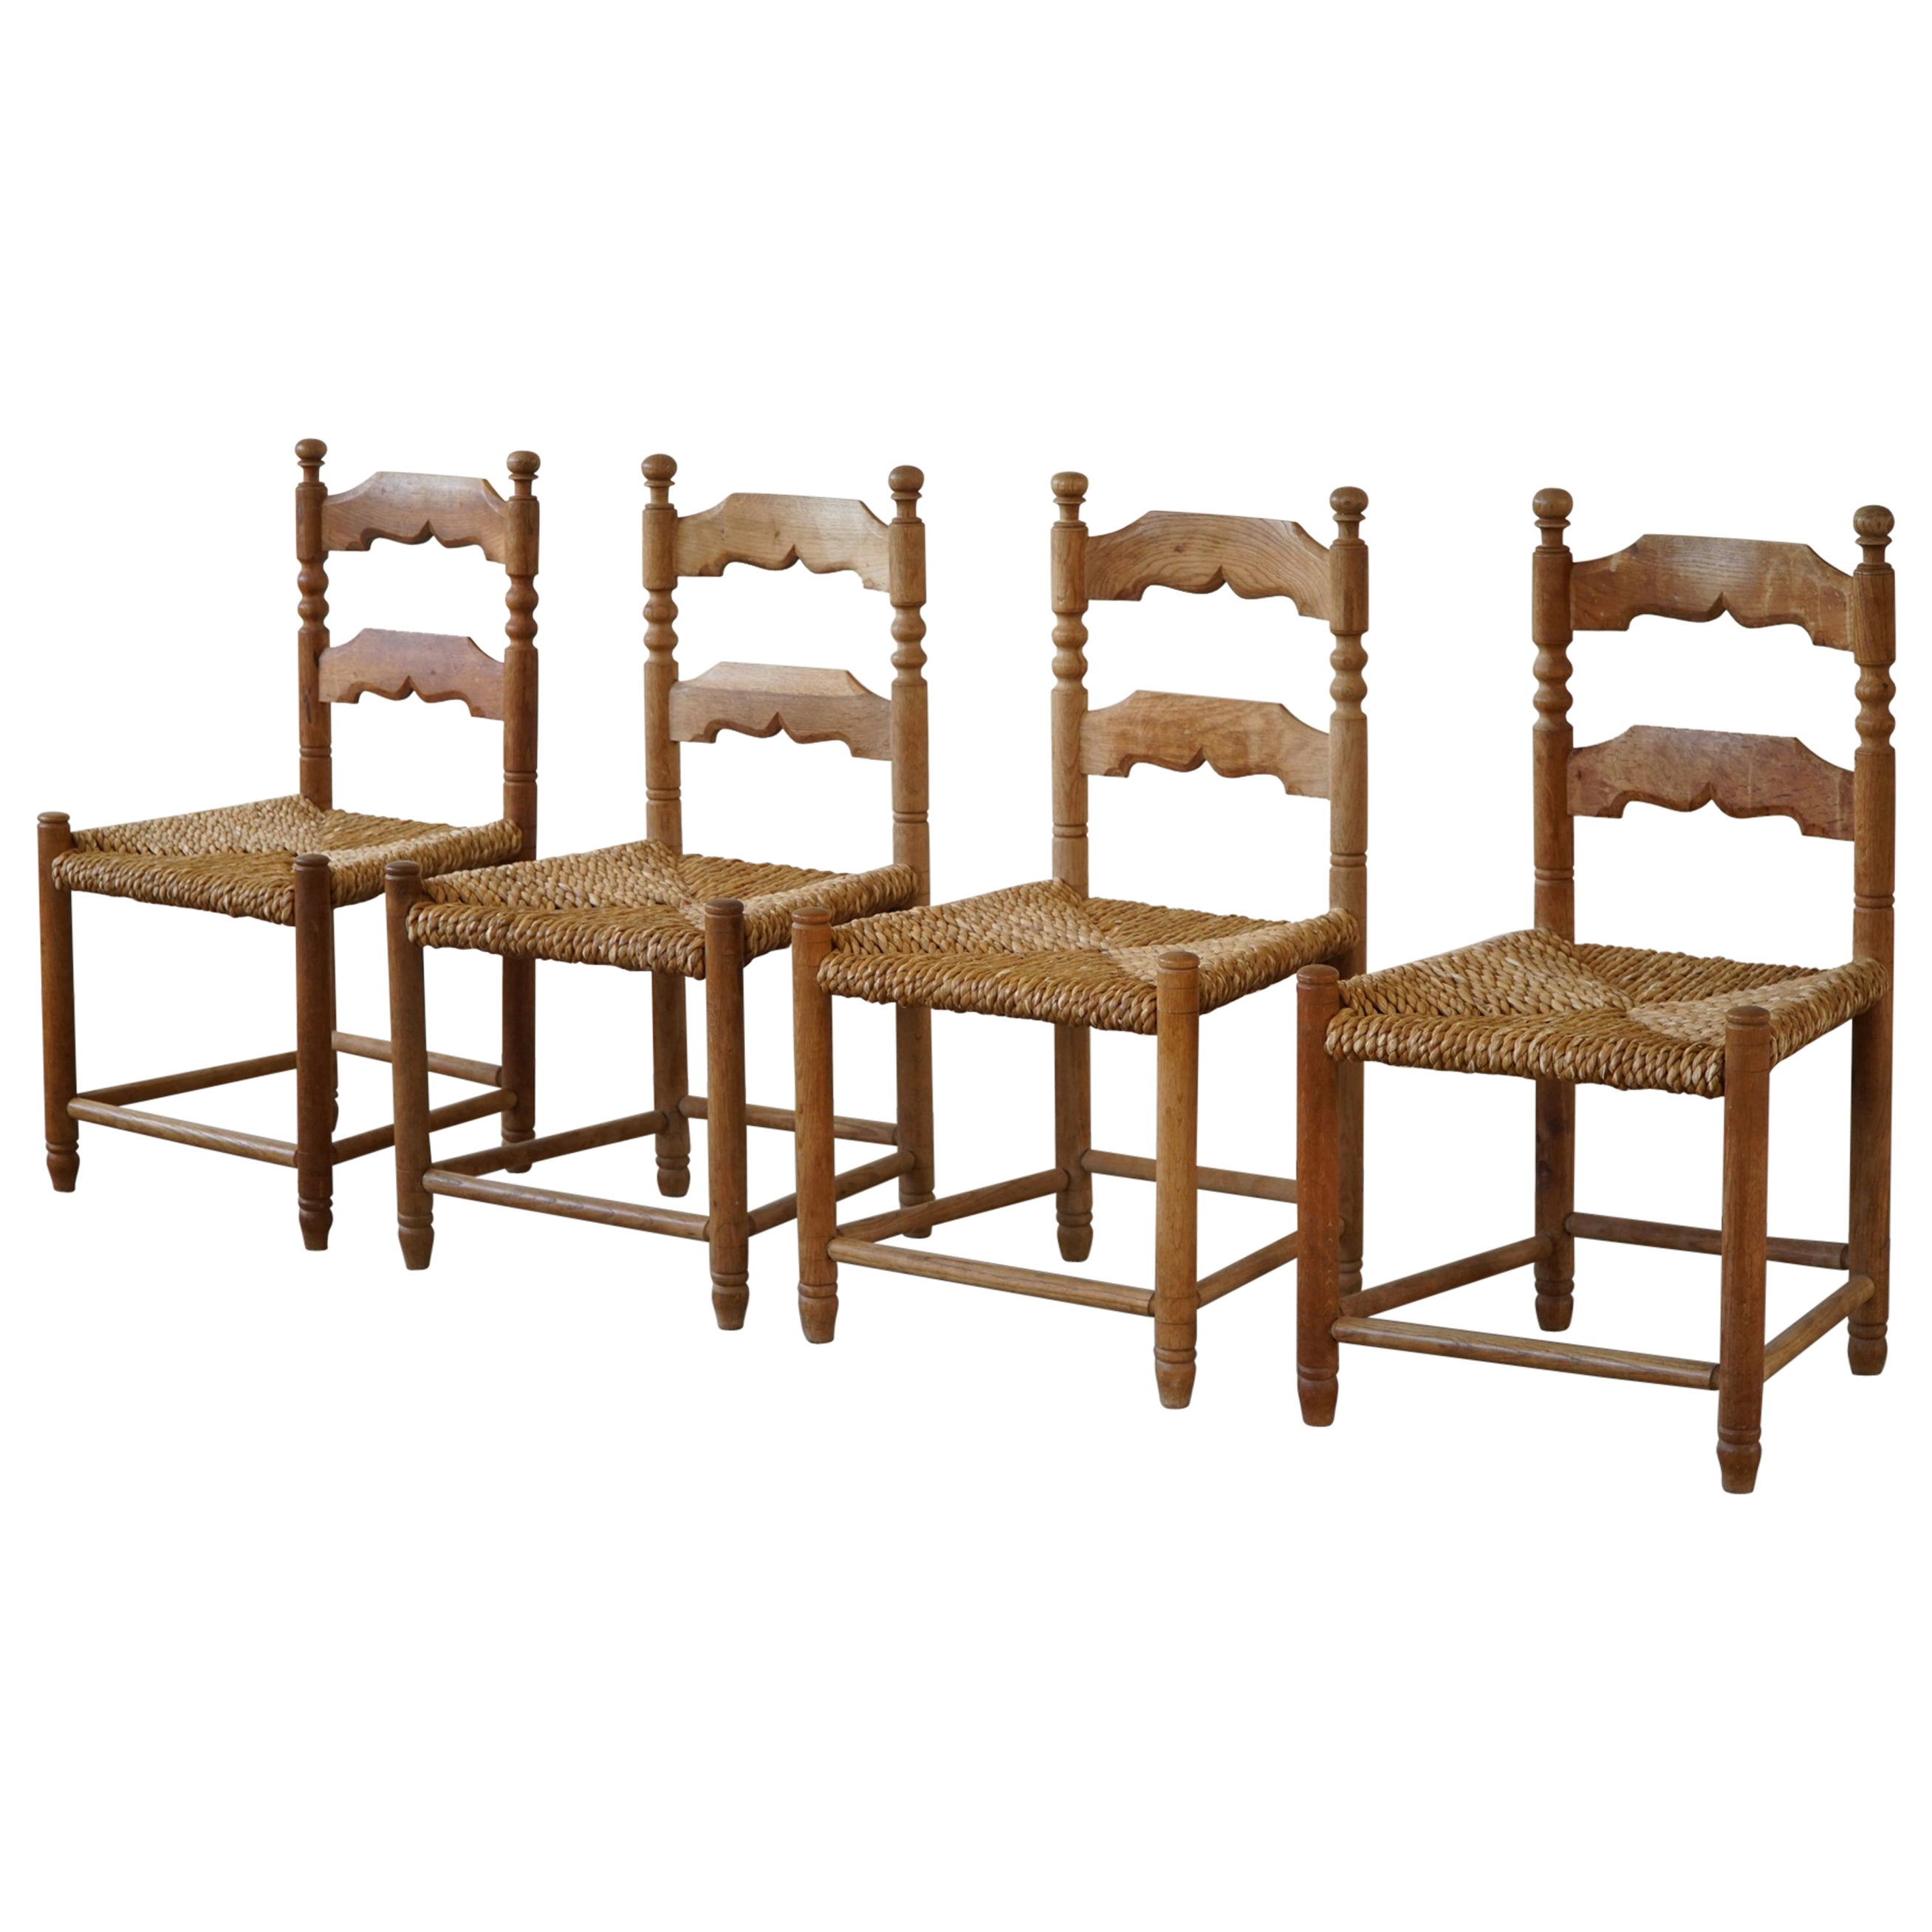 Set of 4 French Modern Brutalist Chairs, Charles Dudouyt Style, Made in 1950s